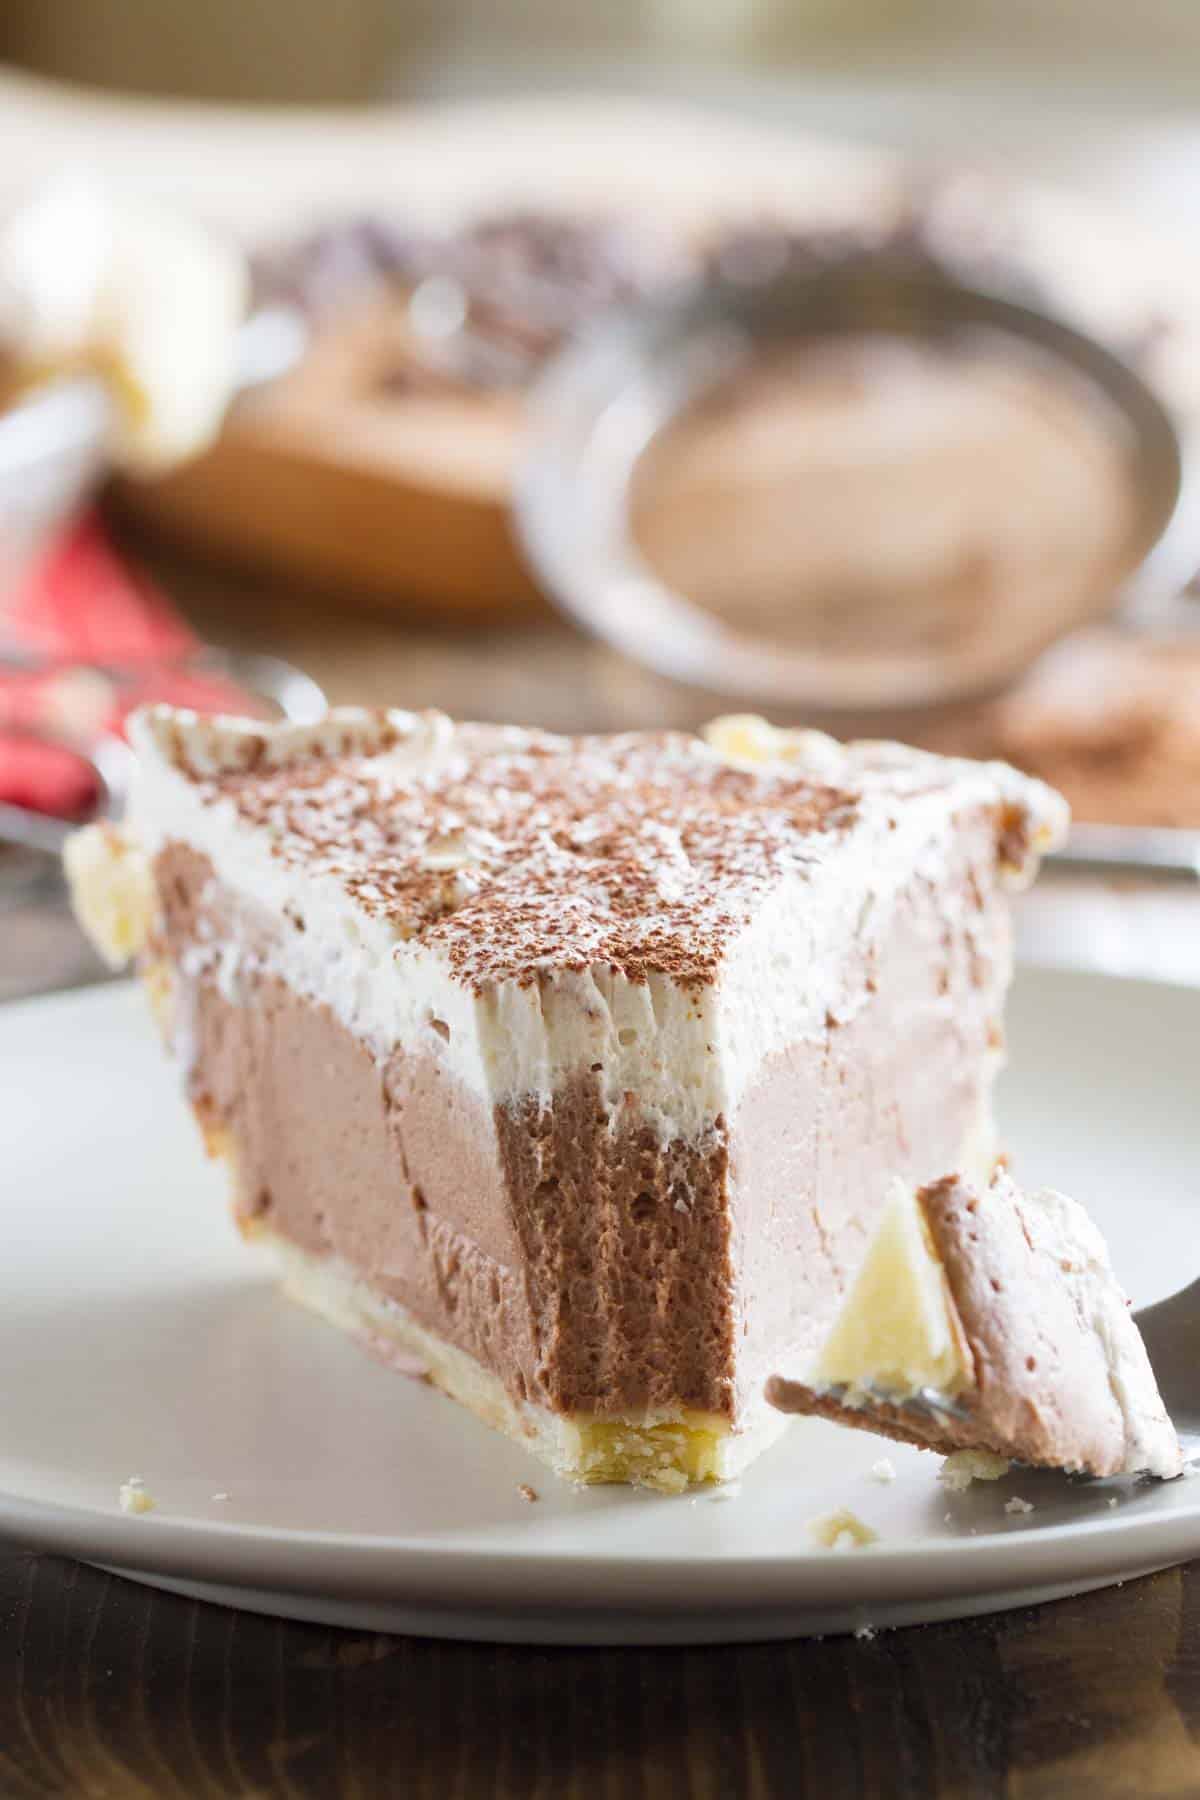 Easy Chocolate Cream Pie from Scratch - Taste and Tell